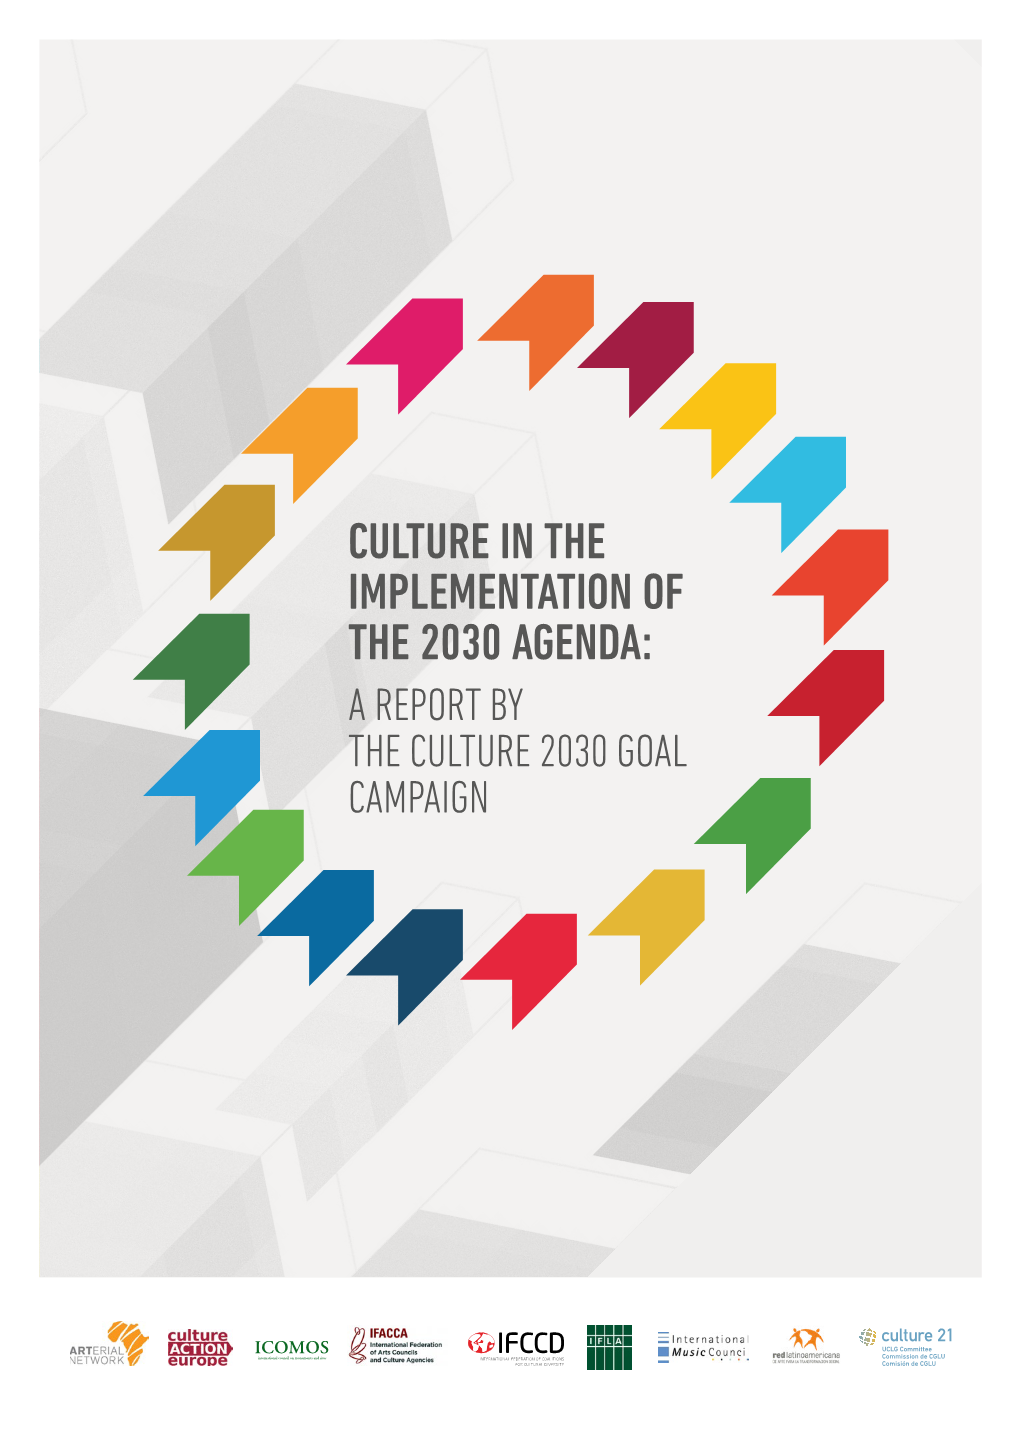 Culture in the Implementation of the 2030 Agenda: a Report by the Culture 2030 Goal Campaign